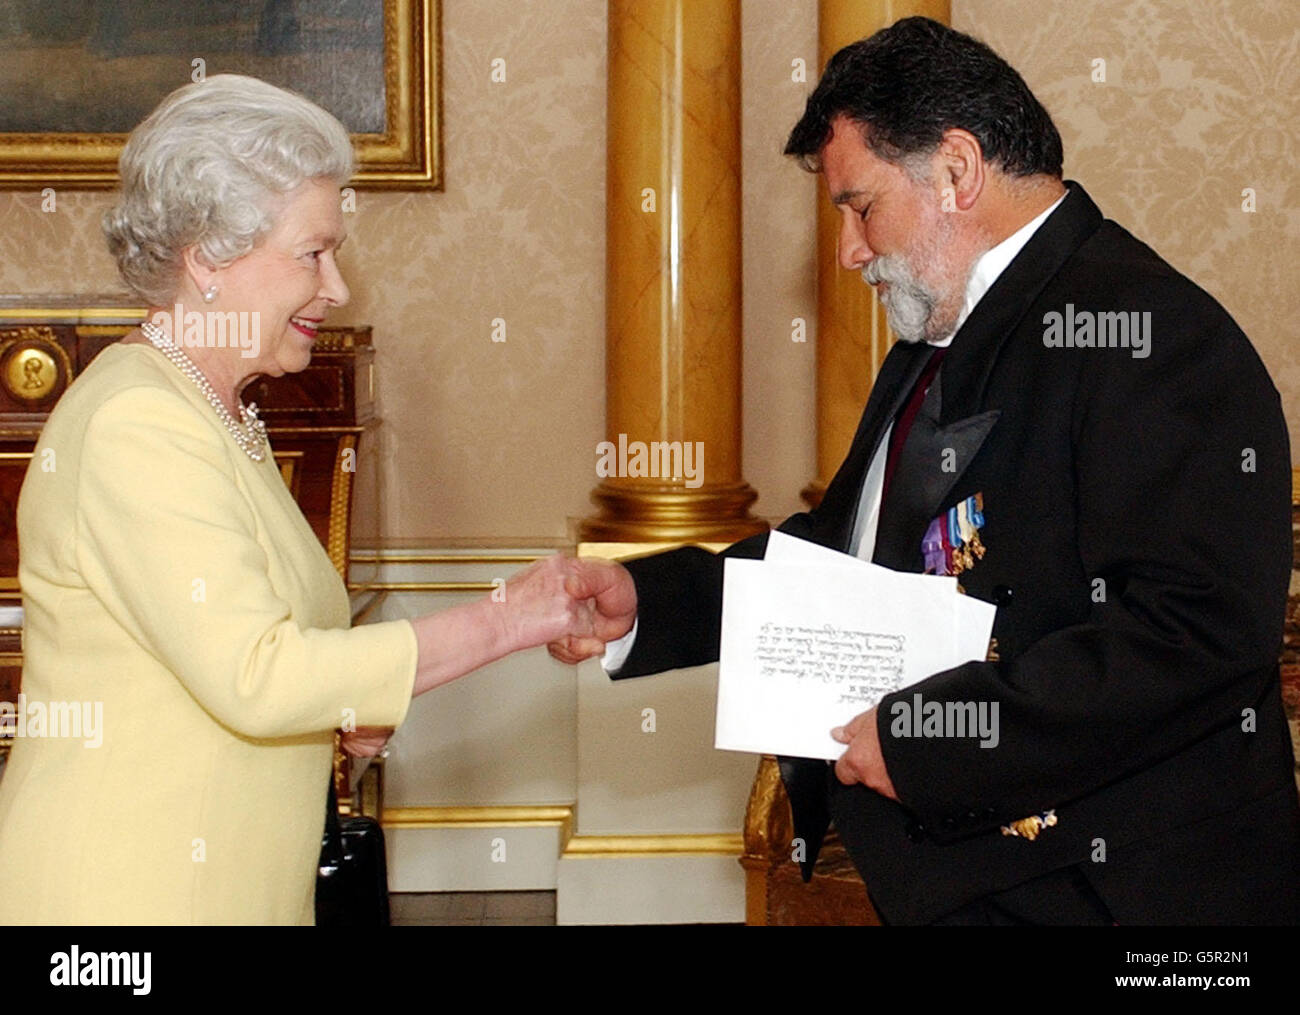 Britain's Queen Elizabeth II receives His Excellency the Ambassador of Peru, Mr Armando Lecaros de Cossio who presented his letter of credence, at Buckingham Palace, London. Stock Photo